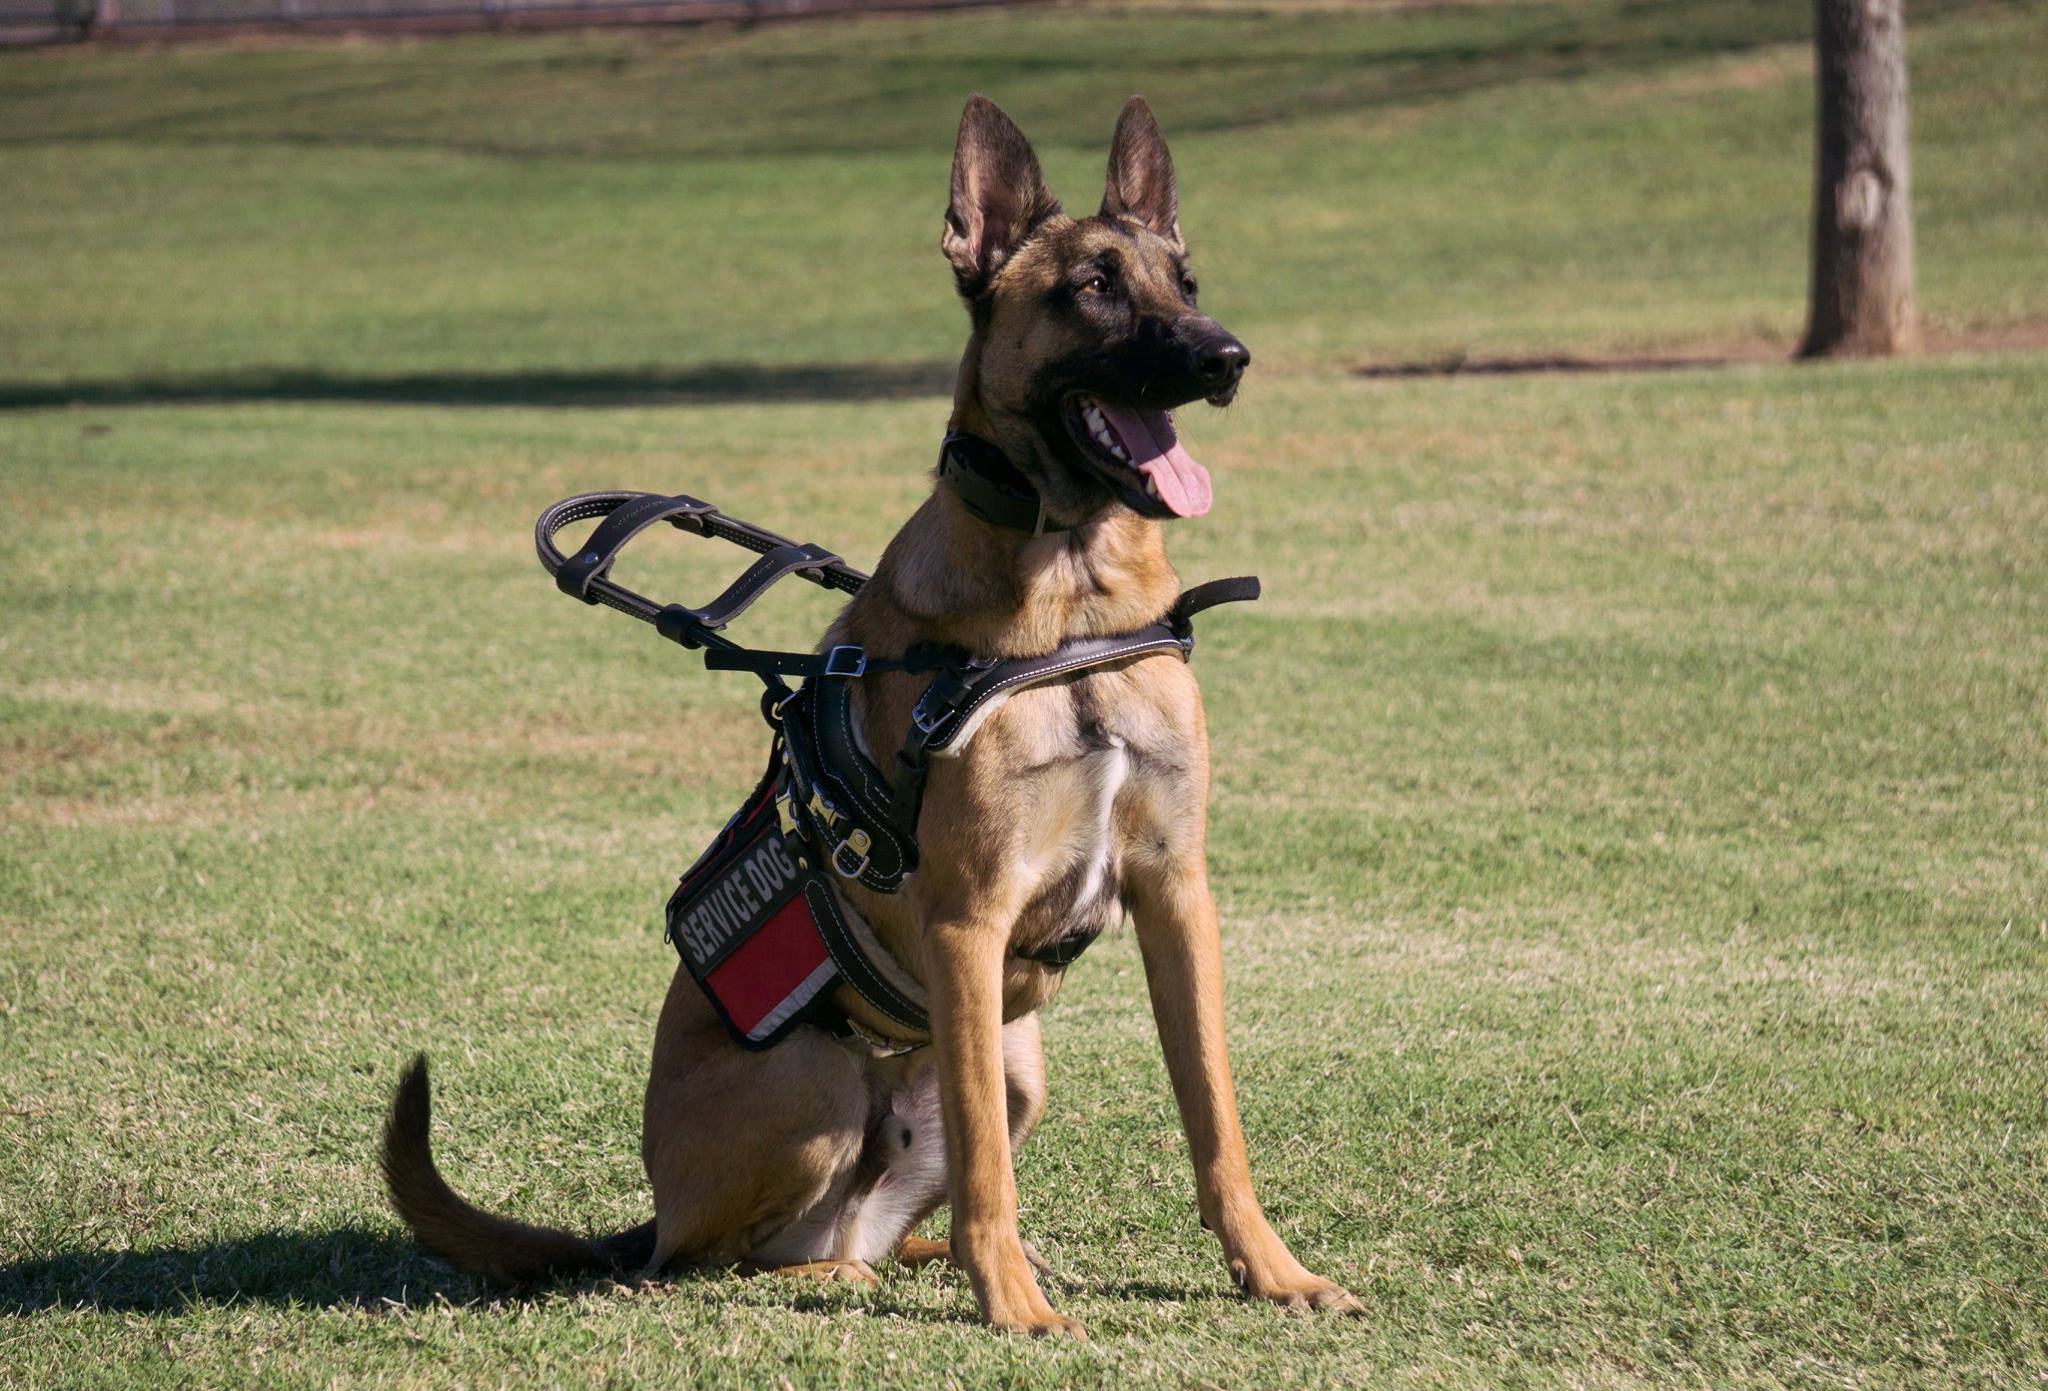 Spending Your Summer with a Service Dog in West Palm Beach / Boca Raton